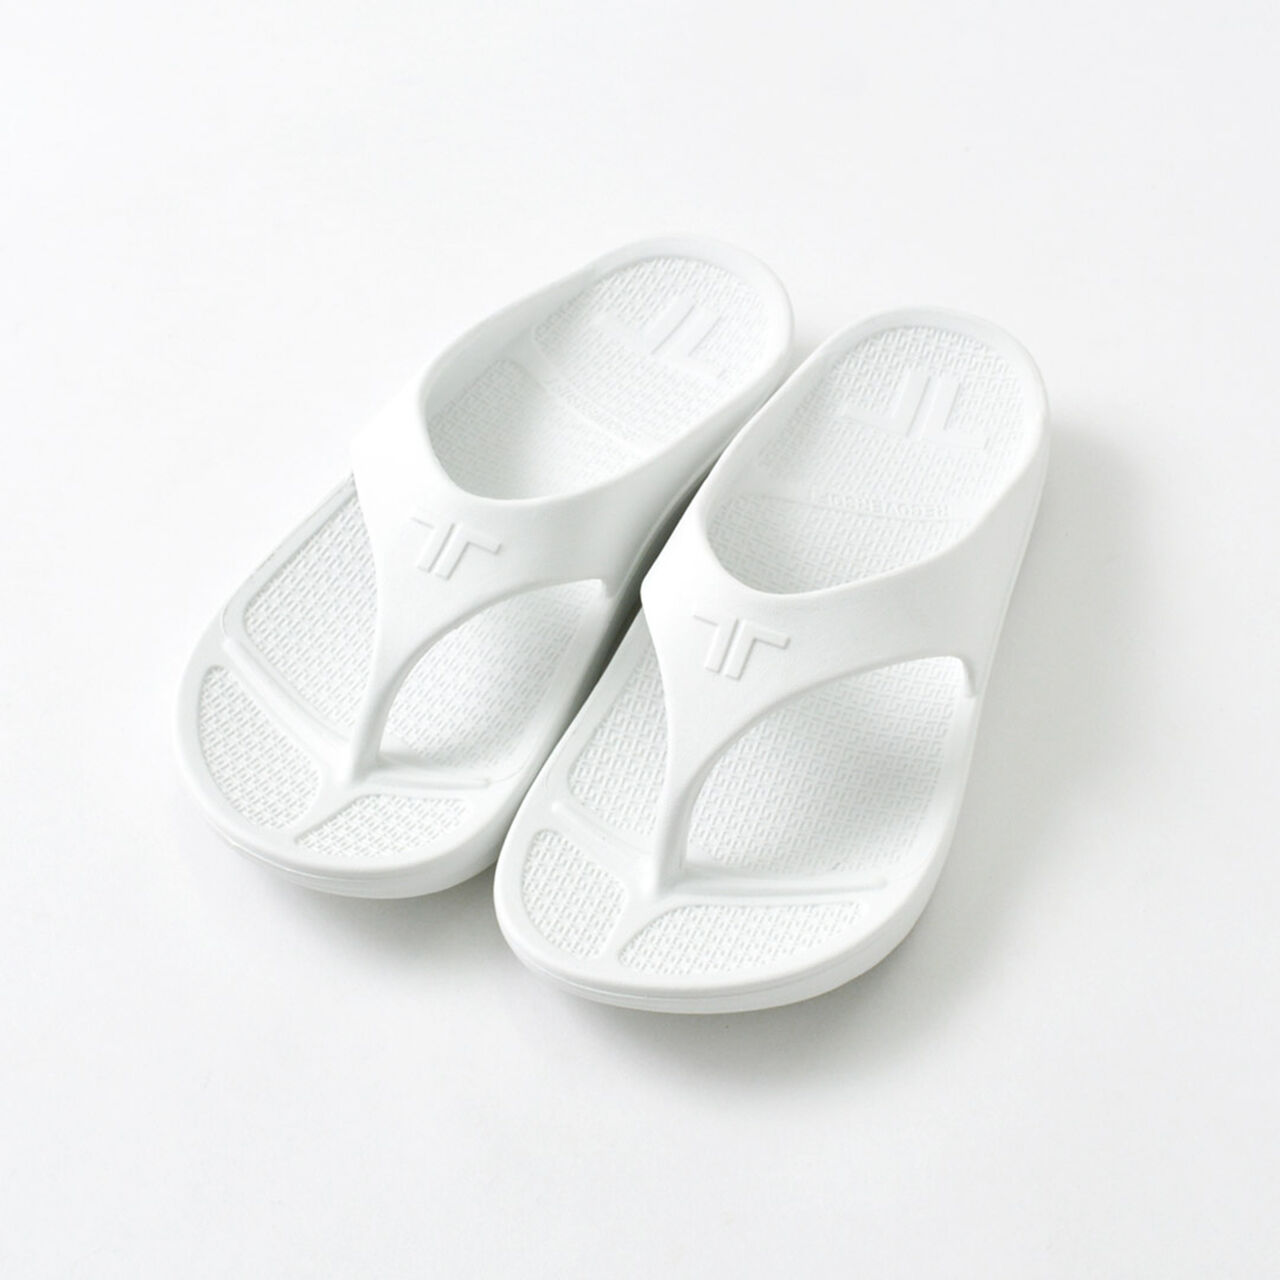 Flip Flop Recovery Sandals,White, large image number 0